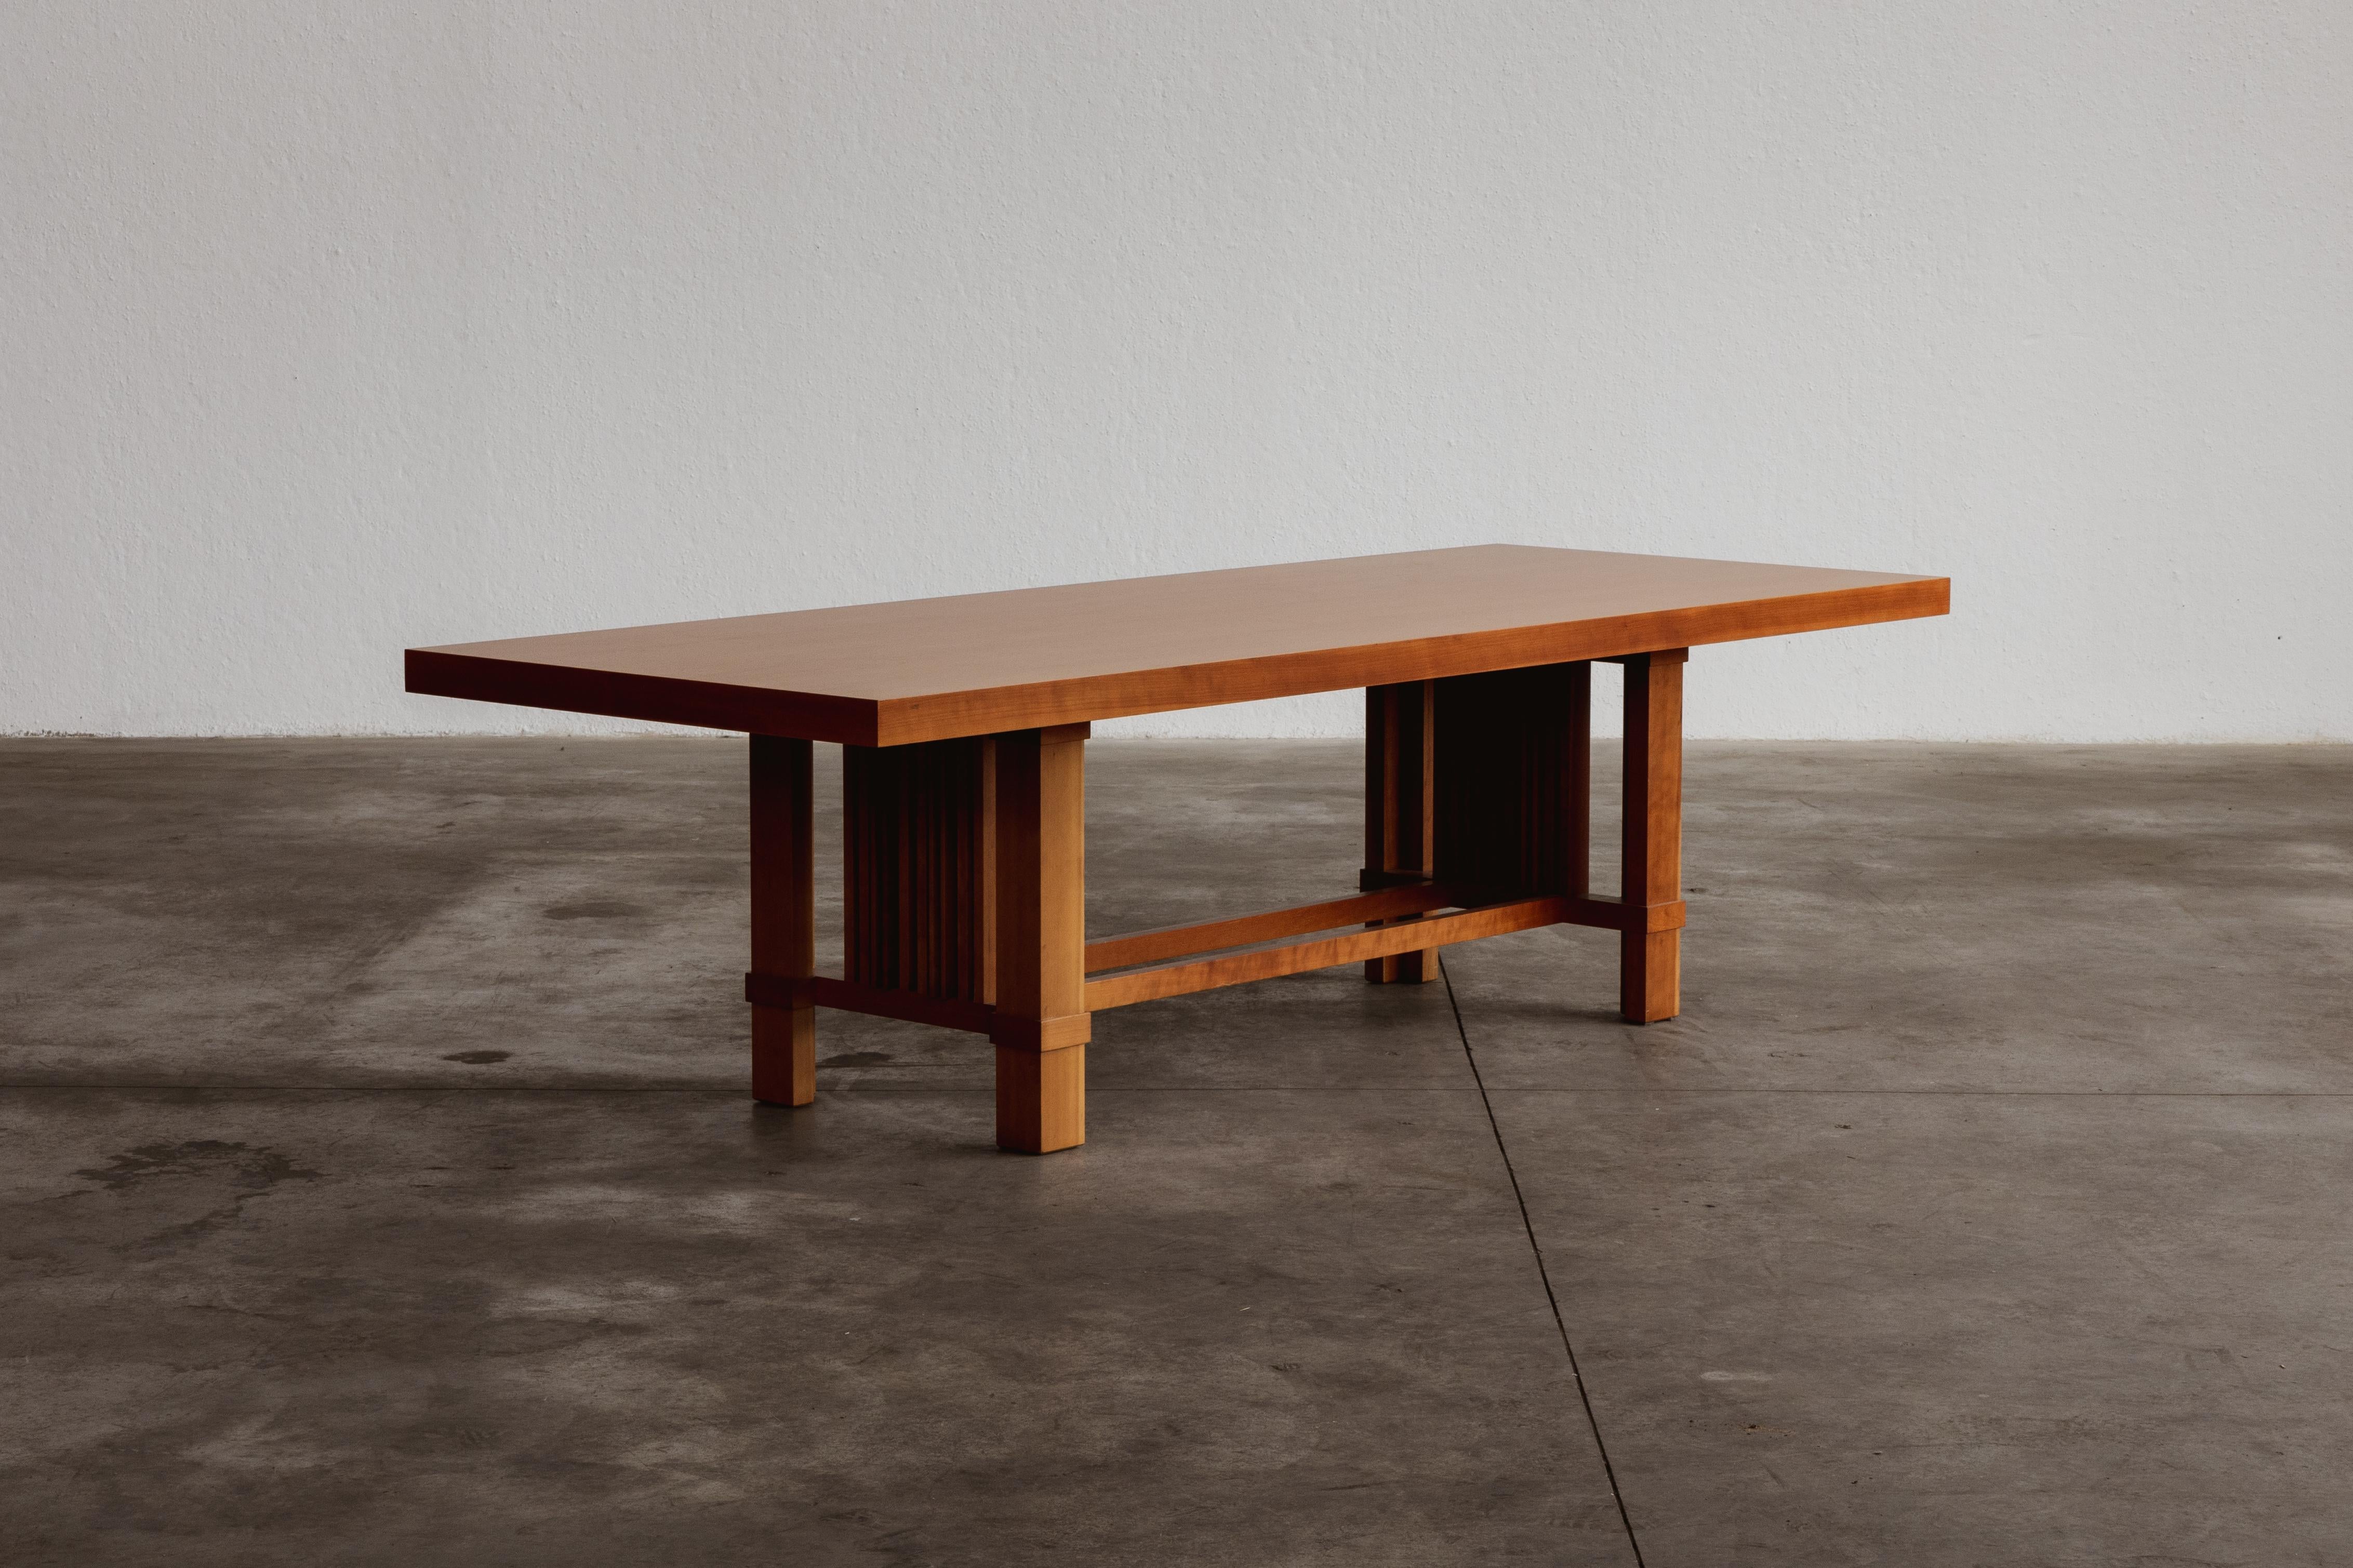 Frank Lloyd Wright “608 Taliesin” dining table for Cassina, walnut, Italy, 1986.

This dining table was designed for the Kansas governor and state senator Henry J. Allen in 1917. Recalling the 1904 